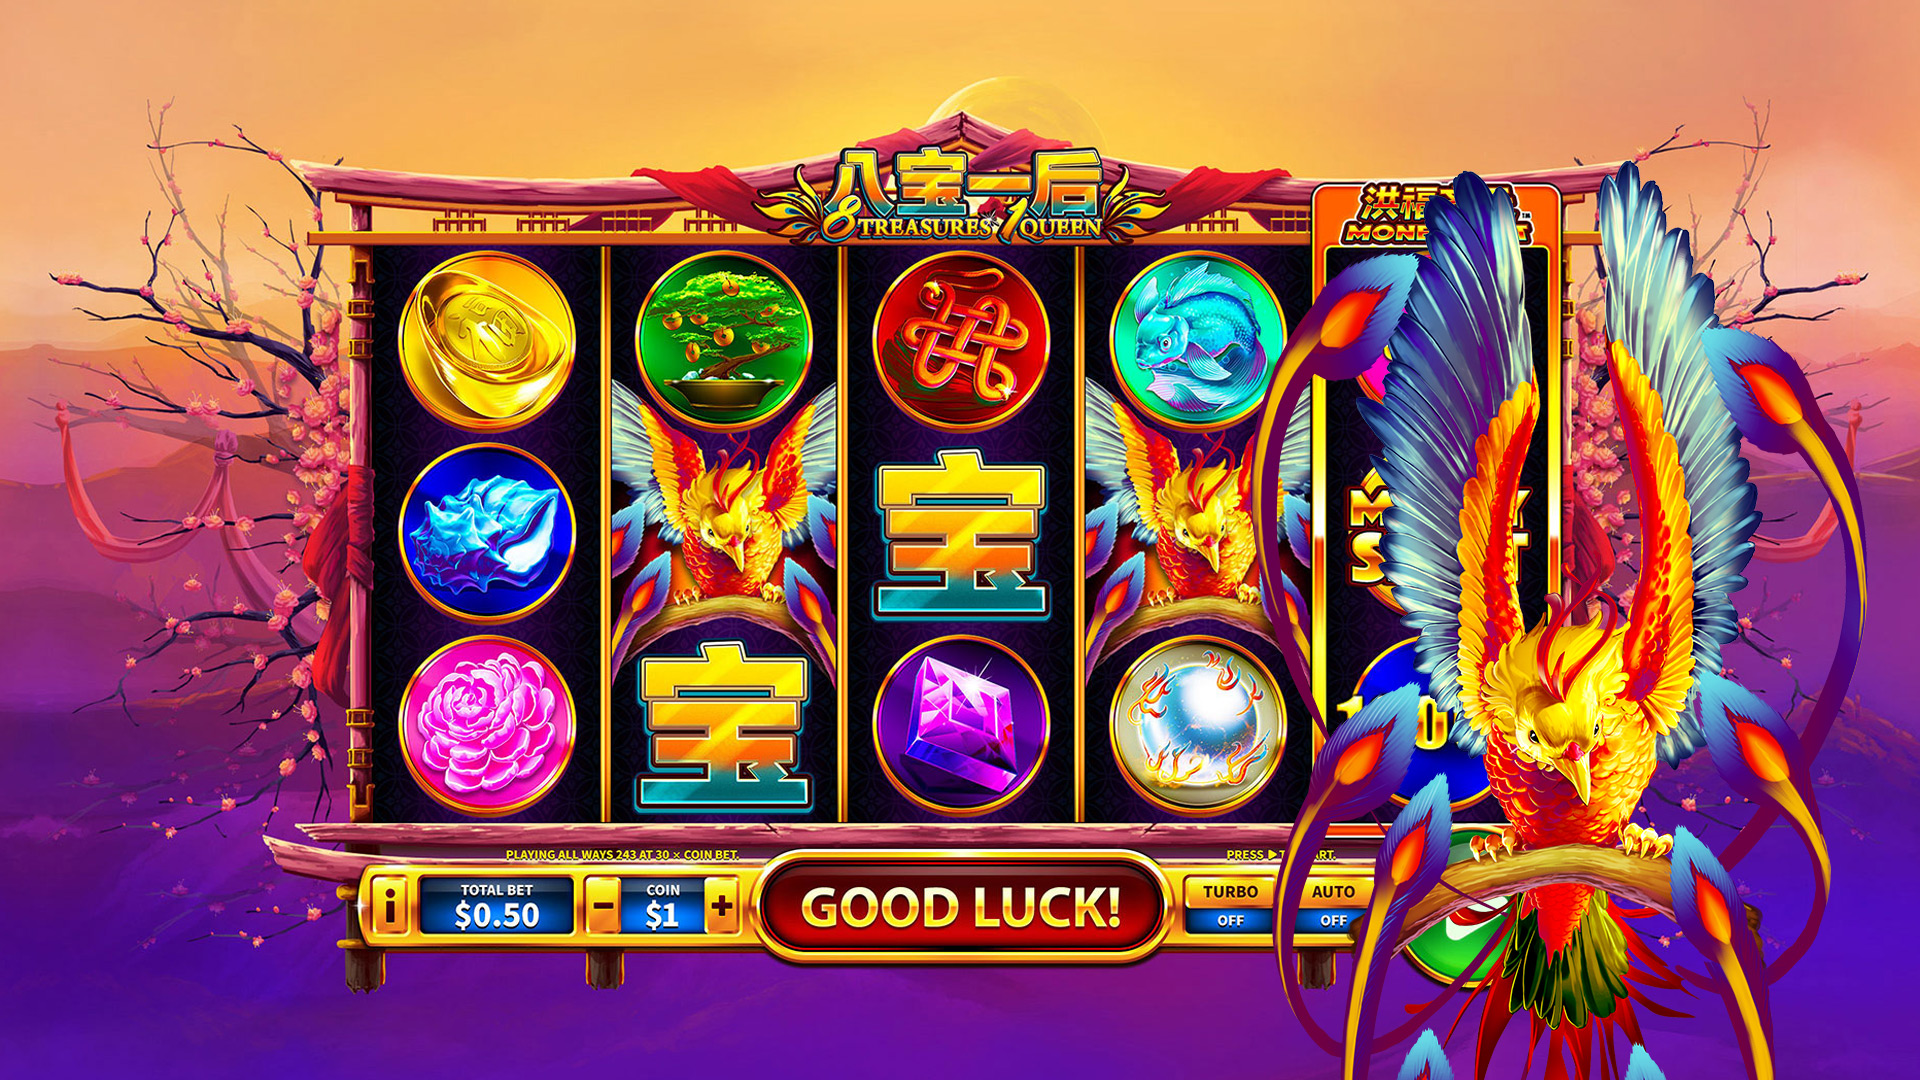 8 Treasures 1 Queen is a Slots Game Provided by the Vendor Partner Skywind Group - GamingSoft